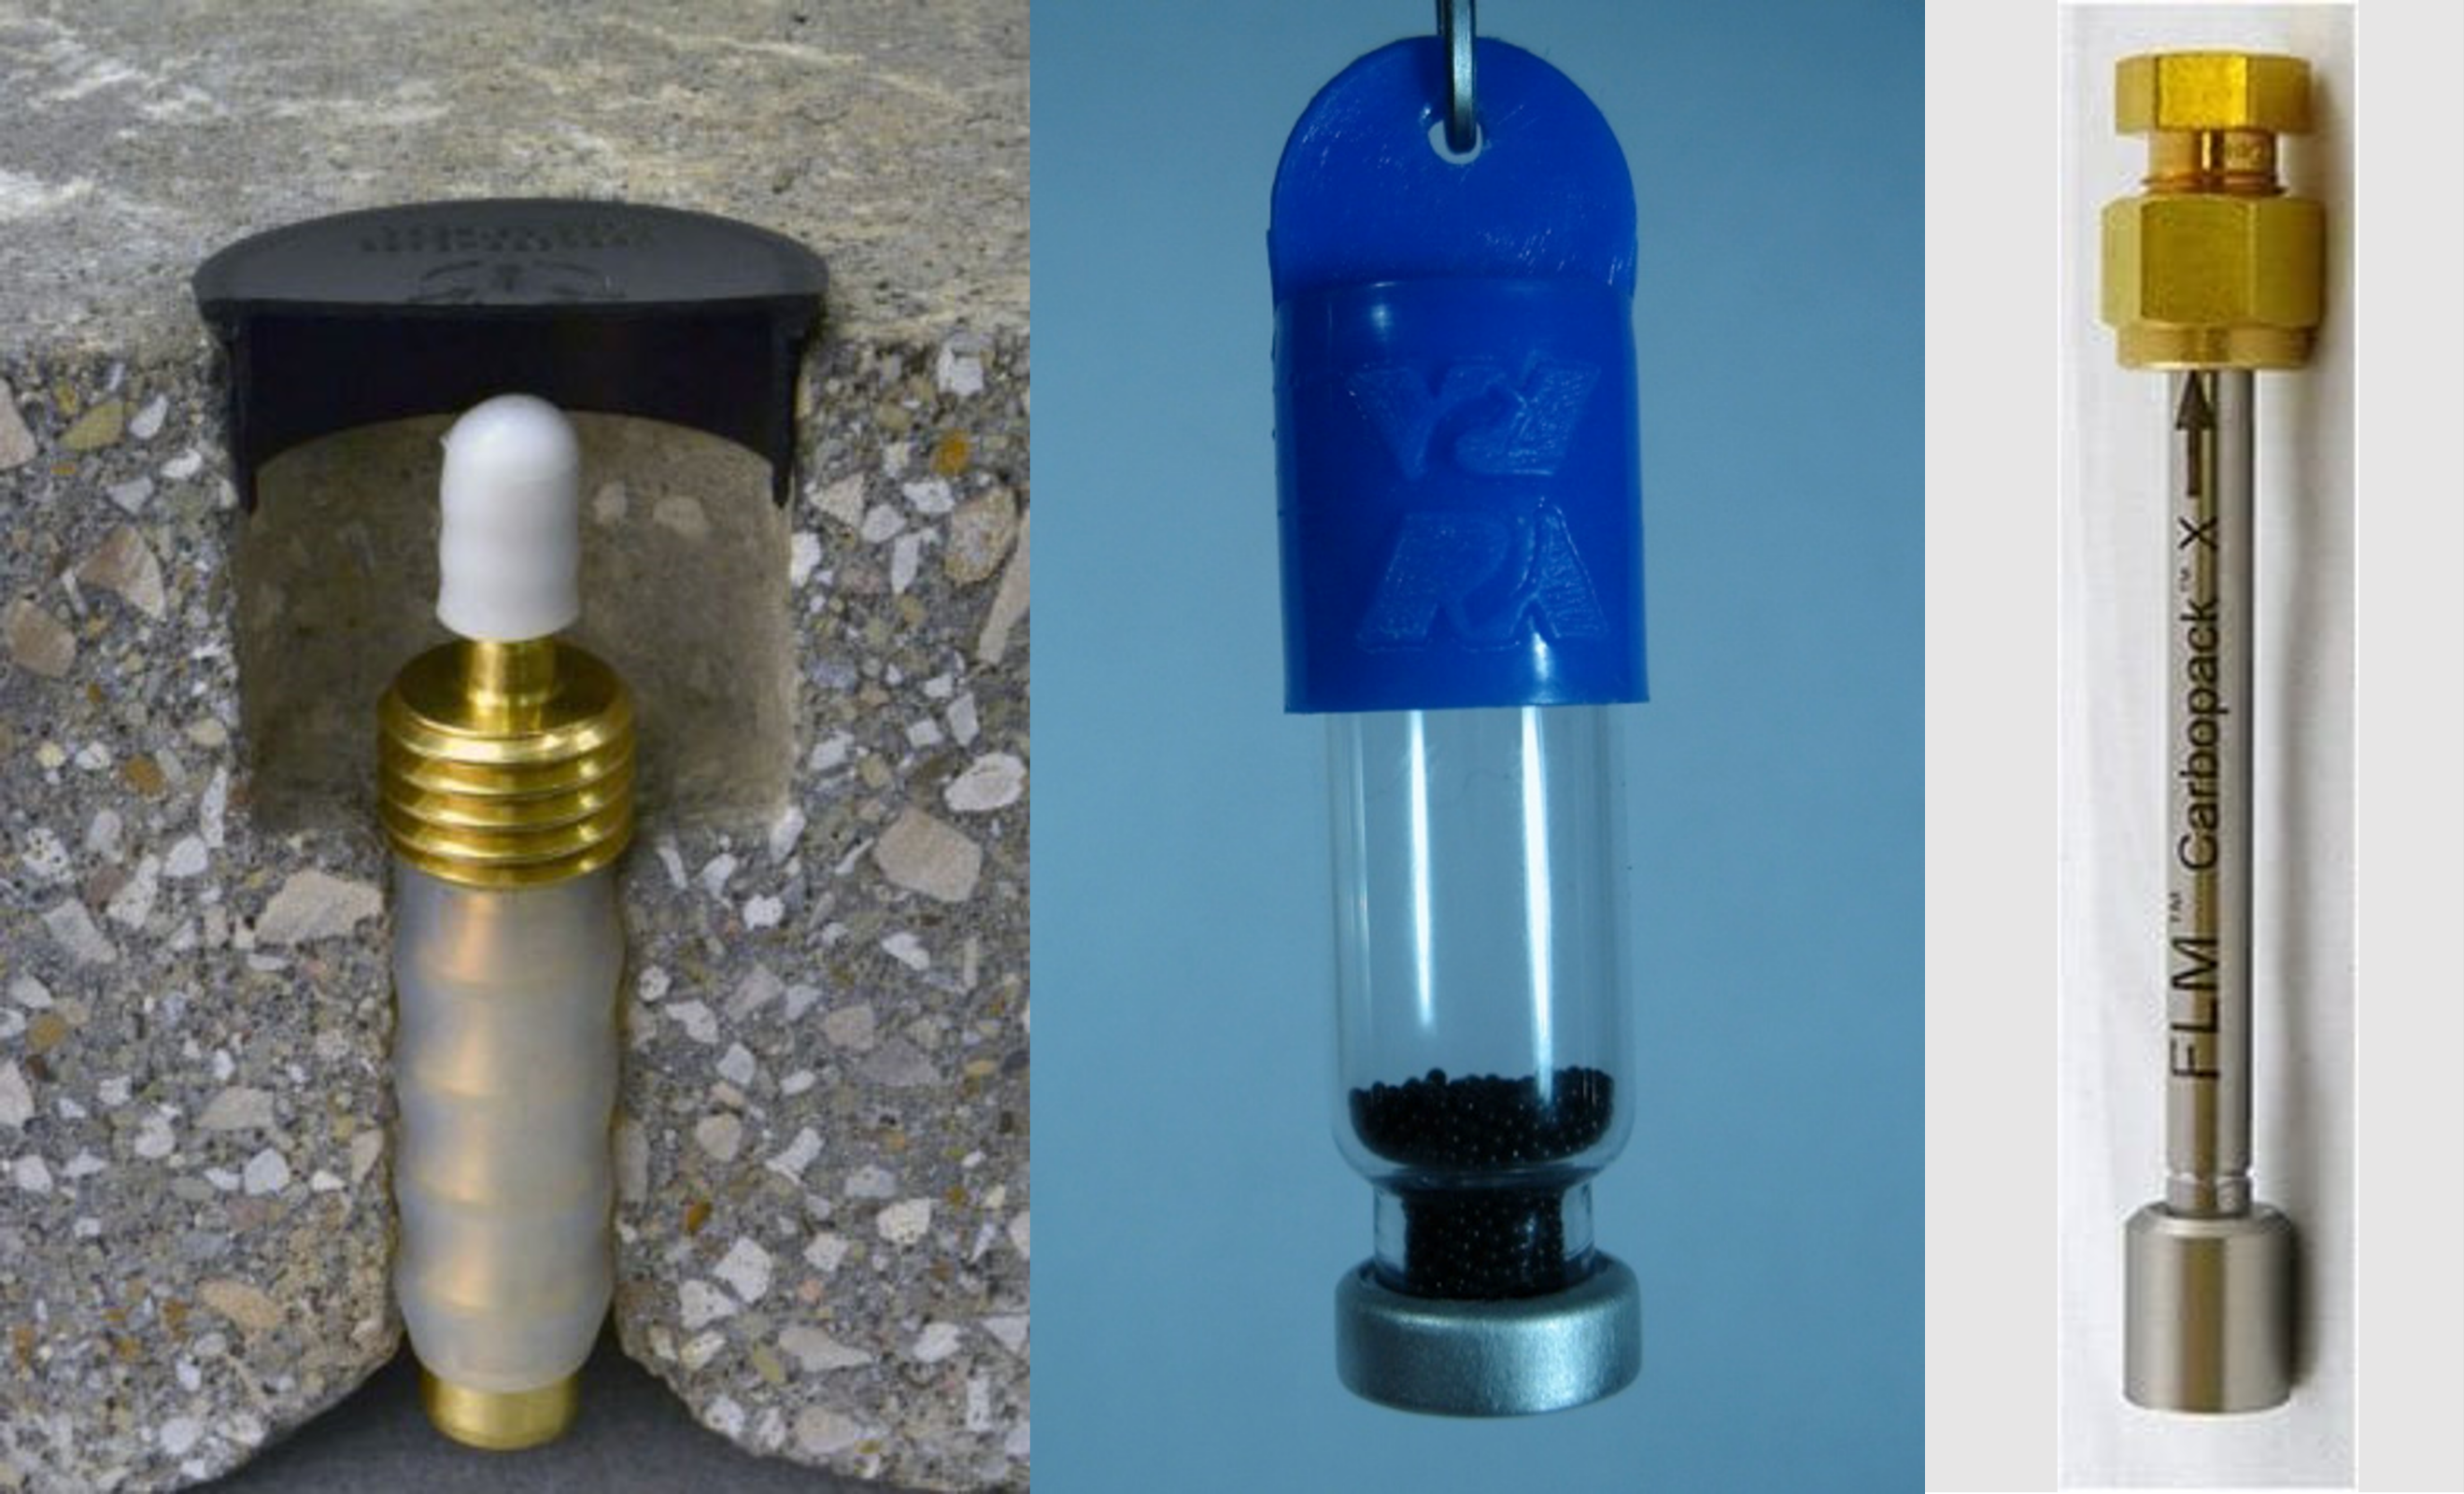 Examples of various devices used to sample for vapor intrusion. From left to right: A sampling port used to collect subslab soil gas; a permeation passive sampler; and a sorbent tube sampler. 